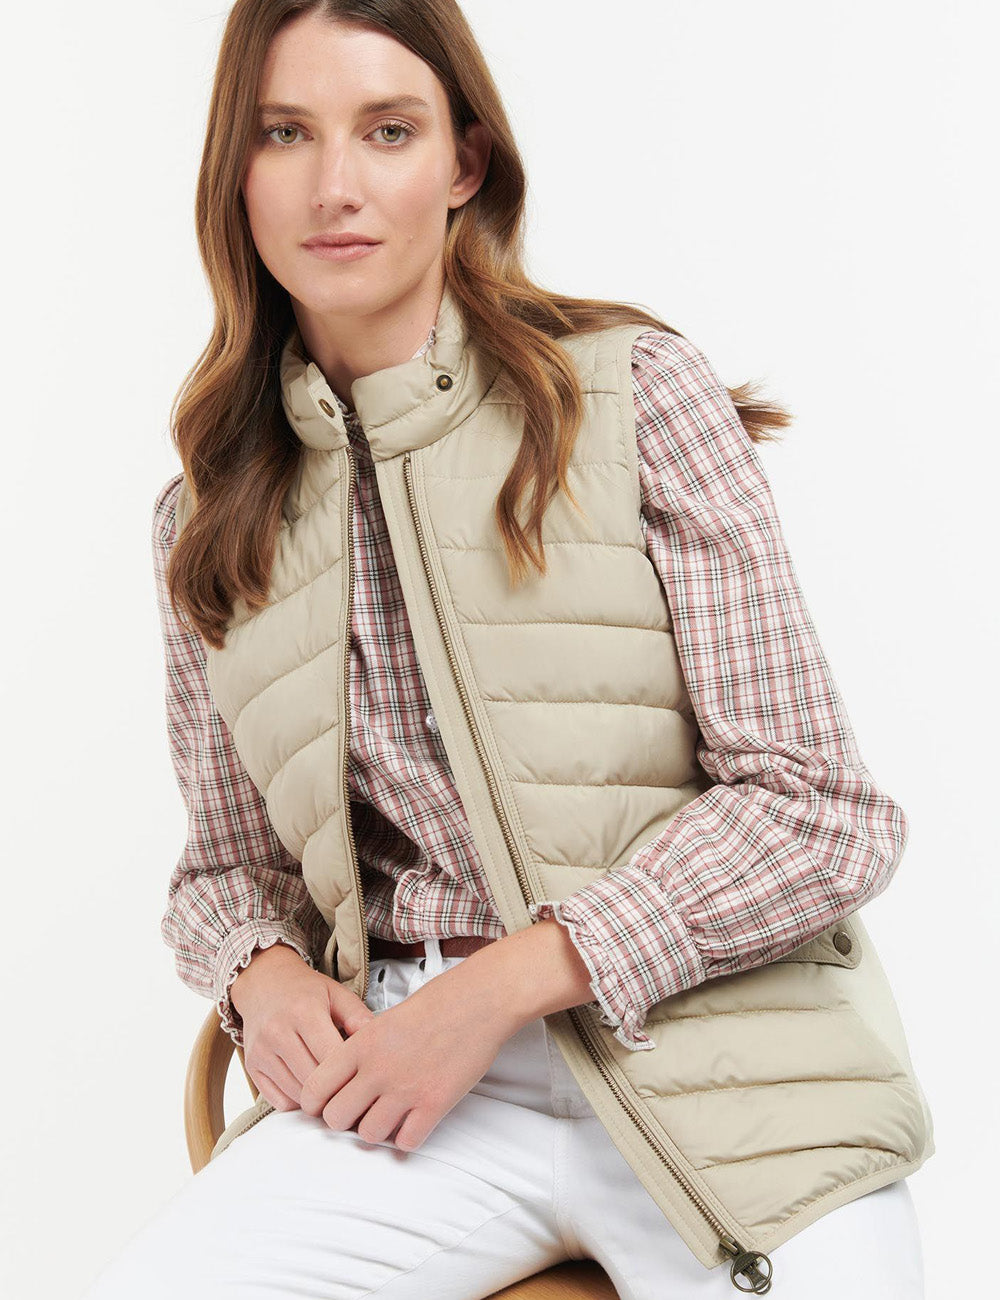 Woman sitting down wearing the Stretch cavalry Gilet from Barbour